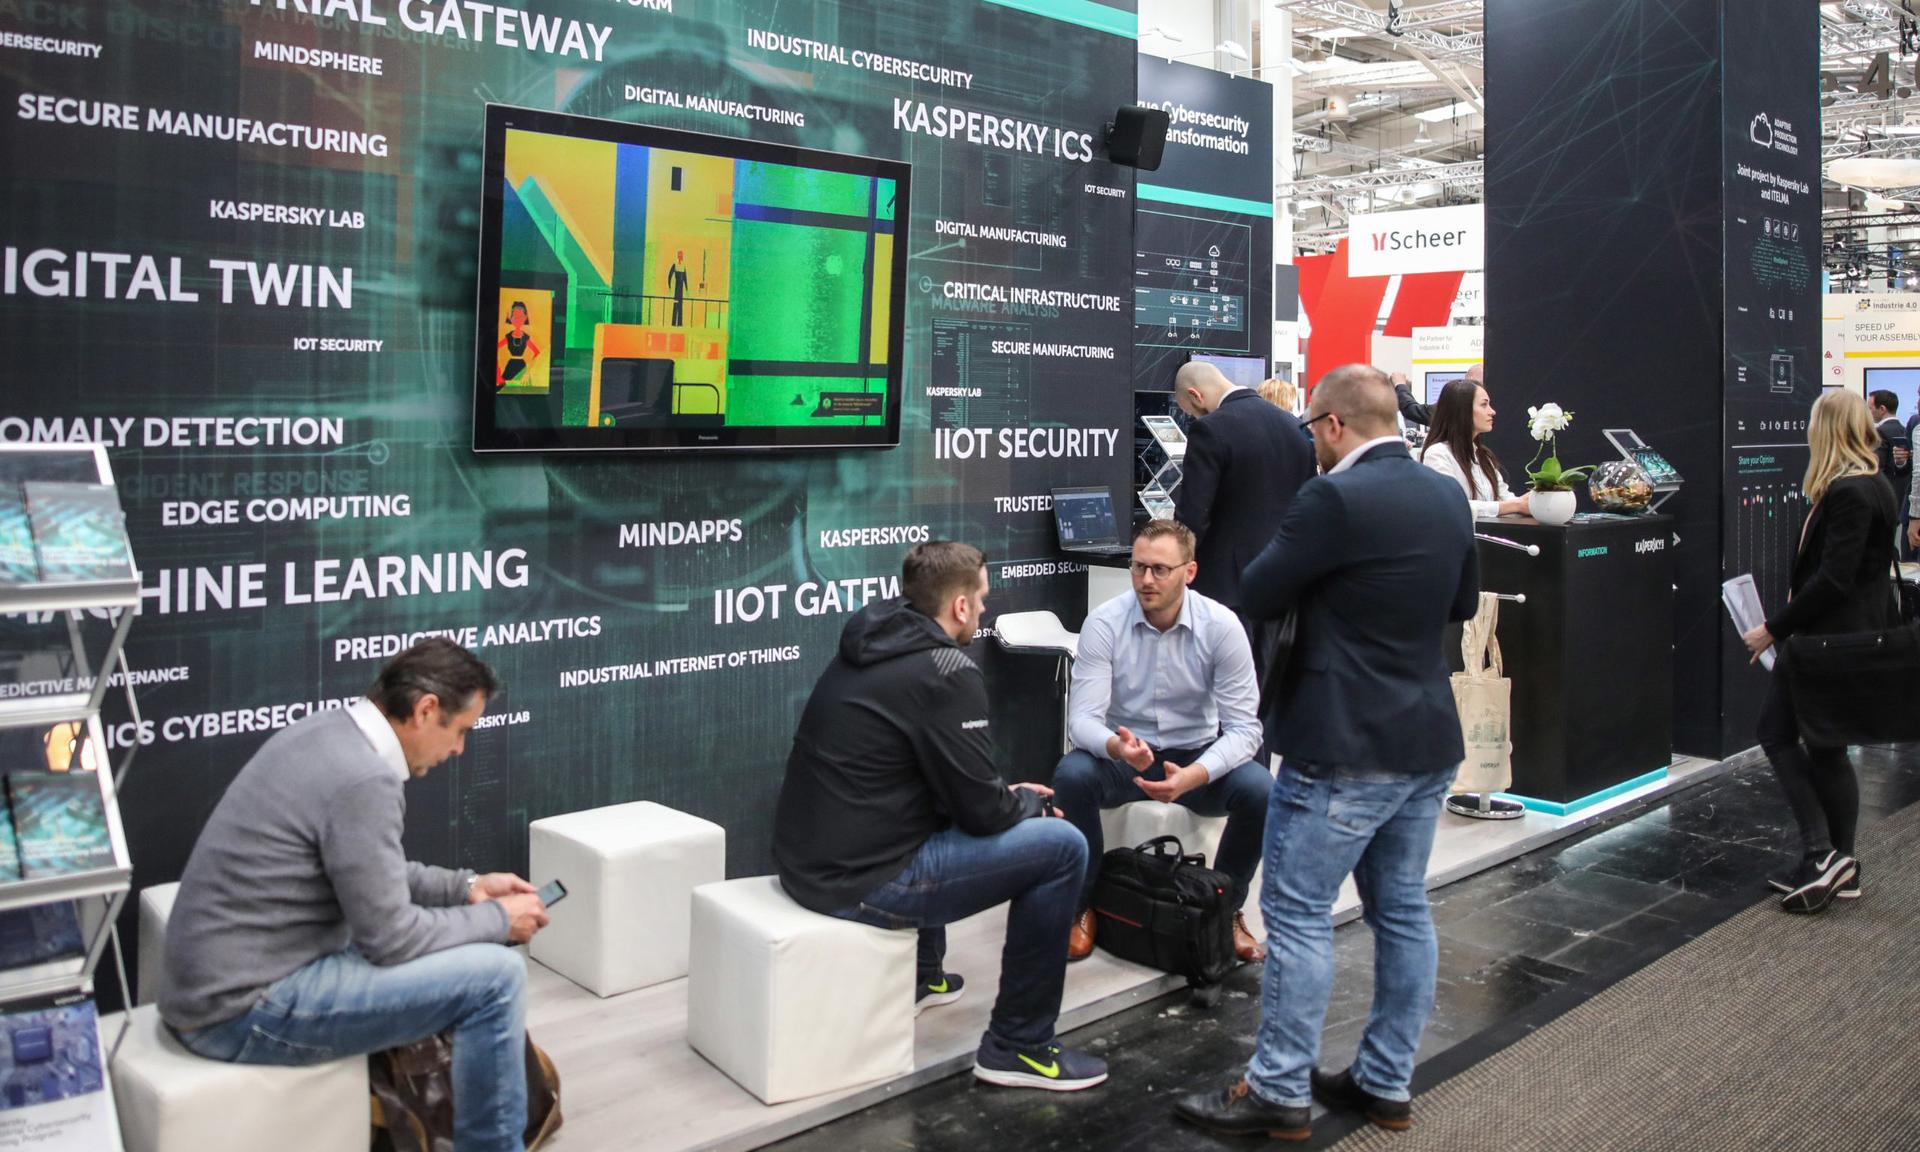 A recent report points to a a cadre of new or emerging technologies that are filling a specific post-COVID need for businesses. Seen here is the Kaspersky Lab booth at Hannover Messe, where the company presented its cybersecurity solutions for Industry 4.0, focusing on machine learning and IoT, among other things. (Photo by Joern Pollex/Getty Image...